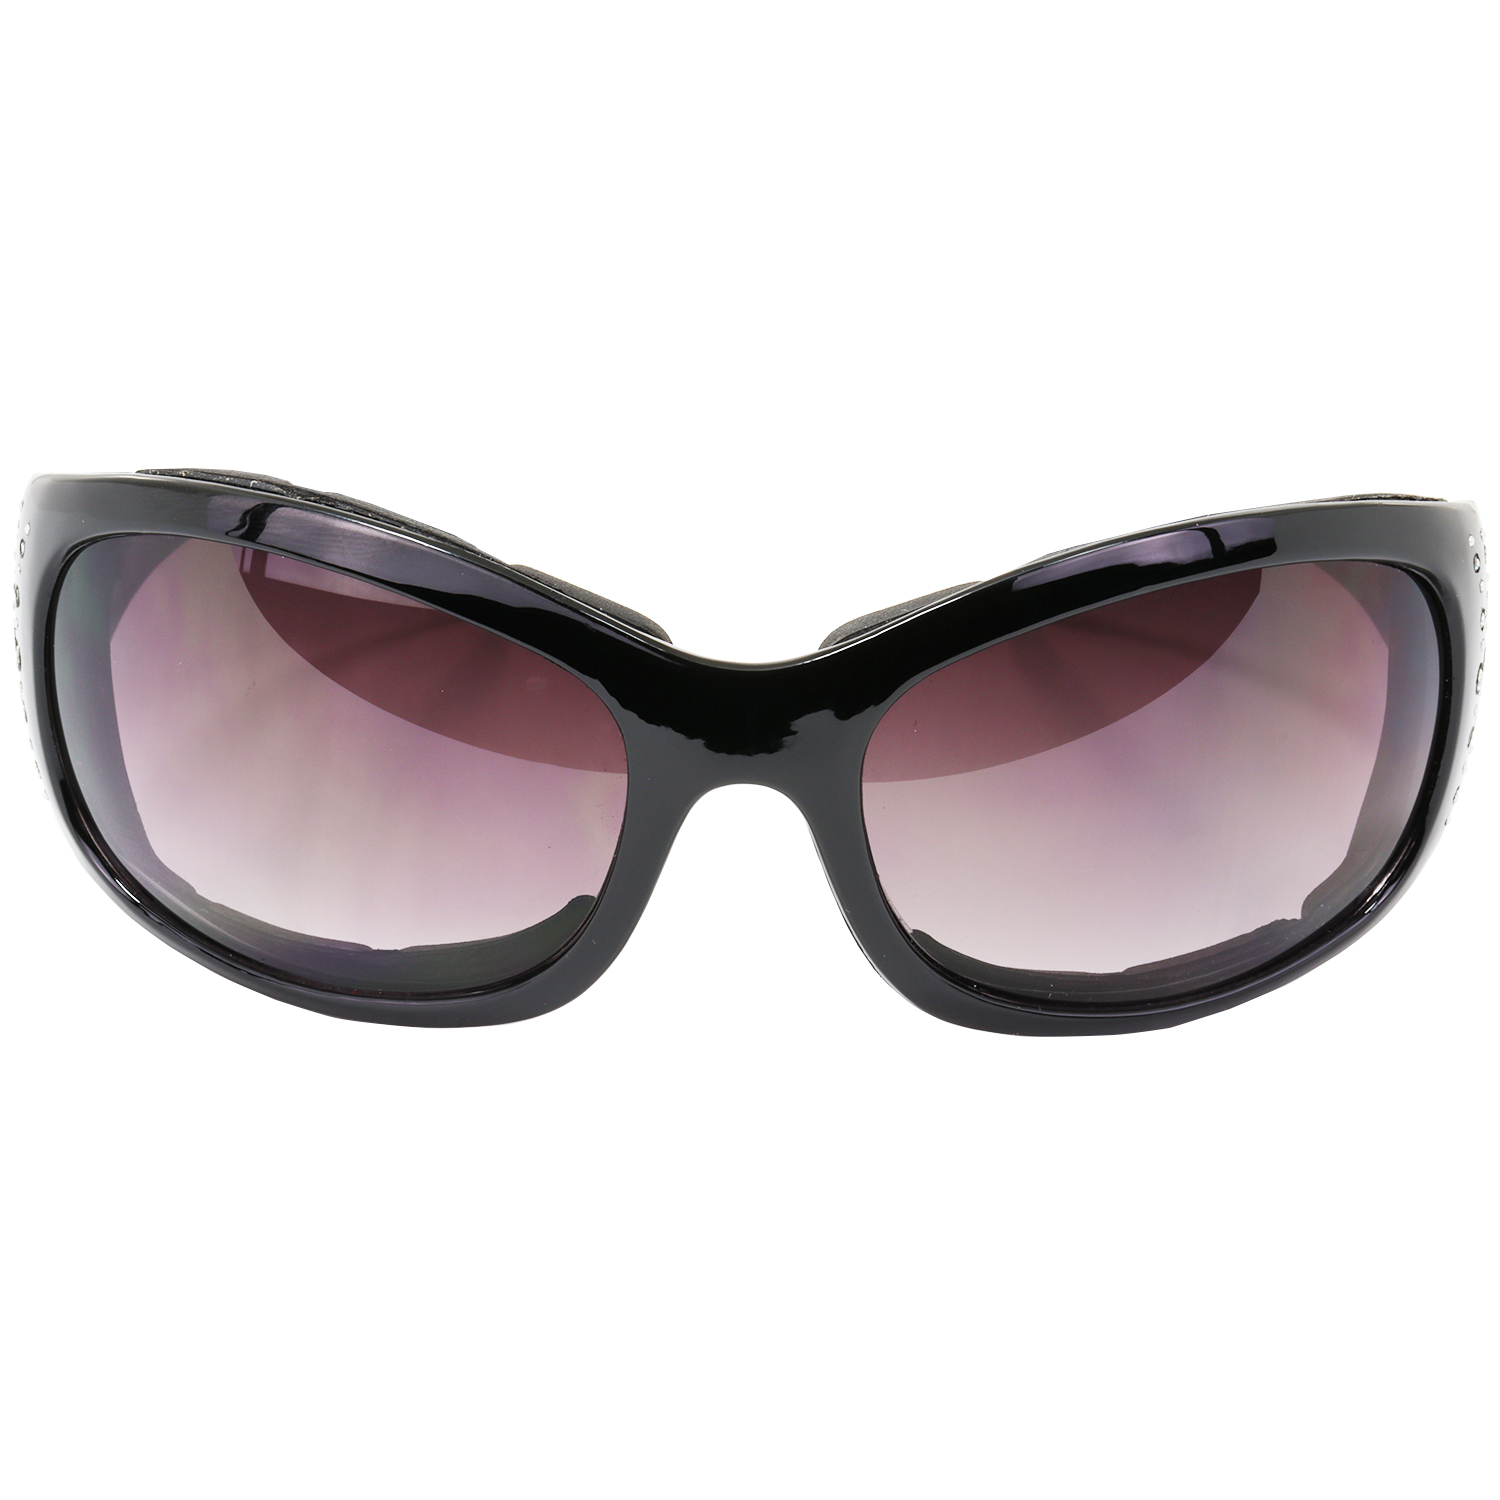 Global Vision Marilyn-2 Plus Motorcycle Riding Glasses for Women Sunglasses Black Padded Frames - image 4 of 7